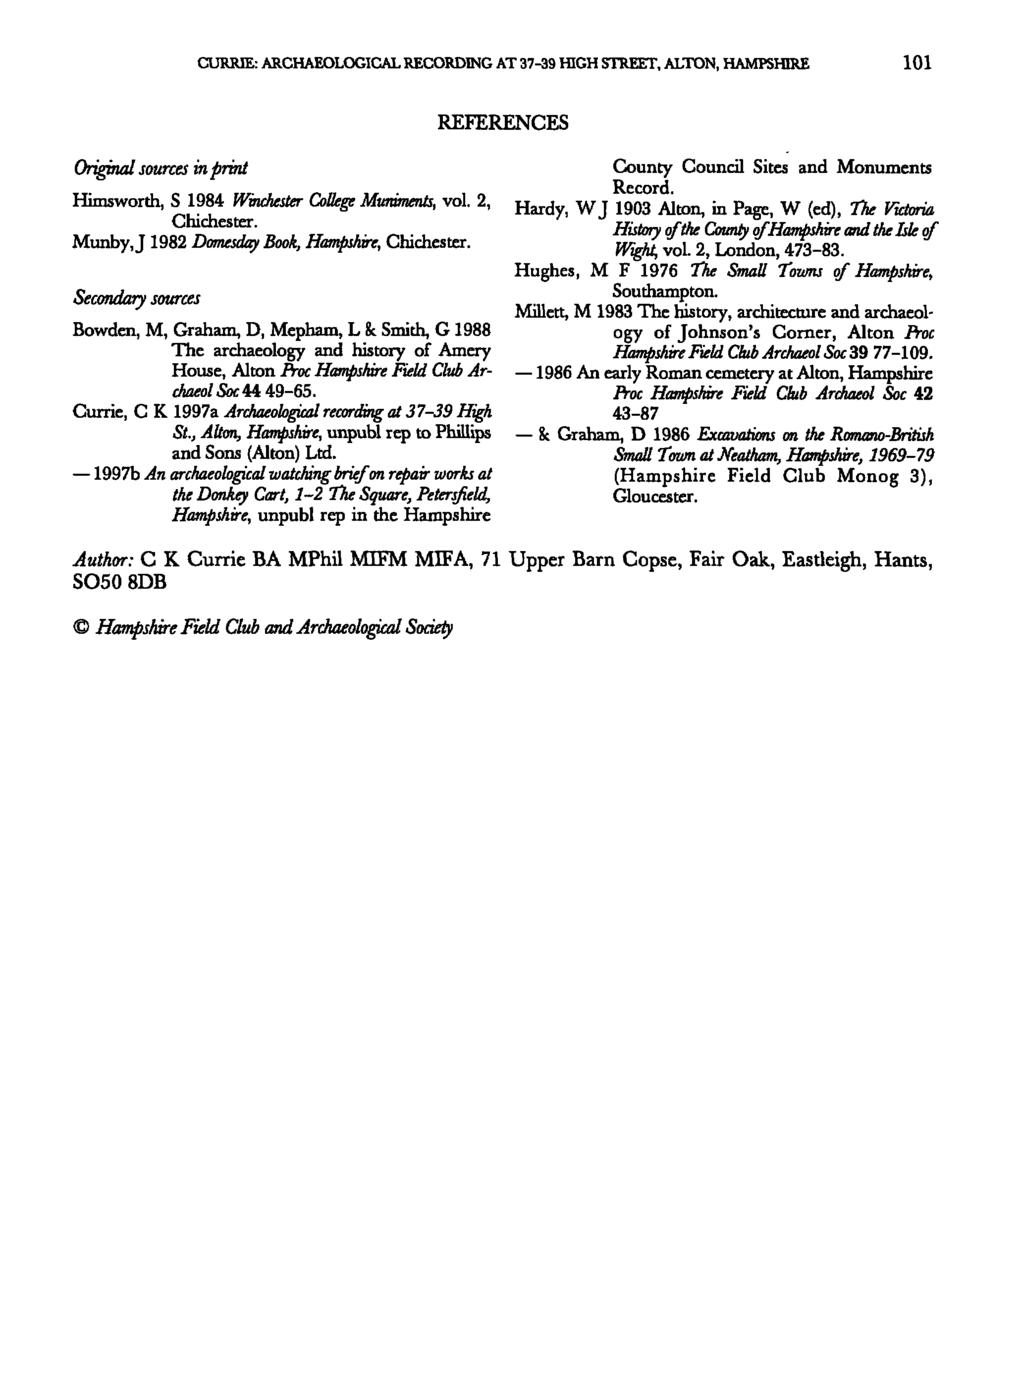 CURR1E: ARCHAEOLOGICAL RECORDING AT 37-39 HIGH STREET, ALTON, HAMPSHIRE 101 Original sources in print REFERENCES Himsworth, S 1984 Winchester College Muniments, vol. 2, Chichester.